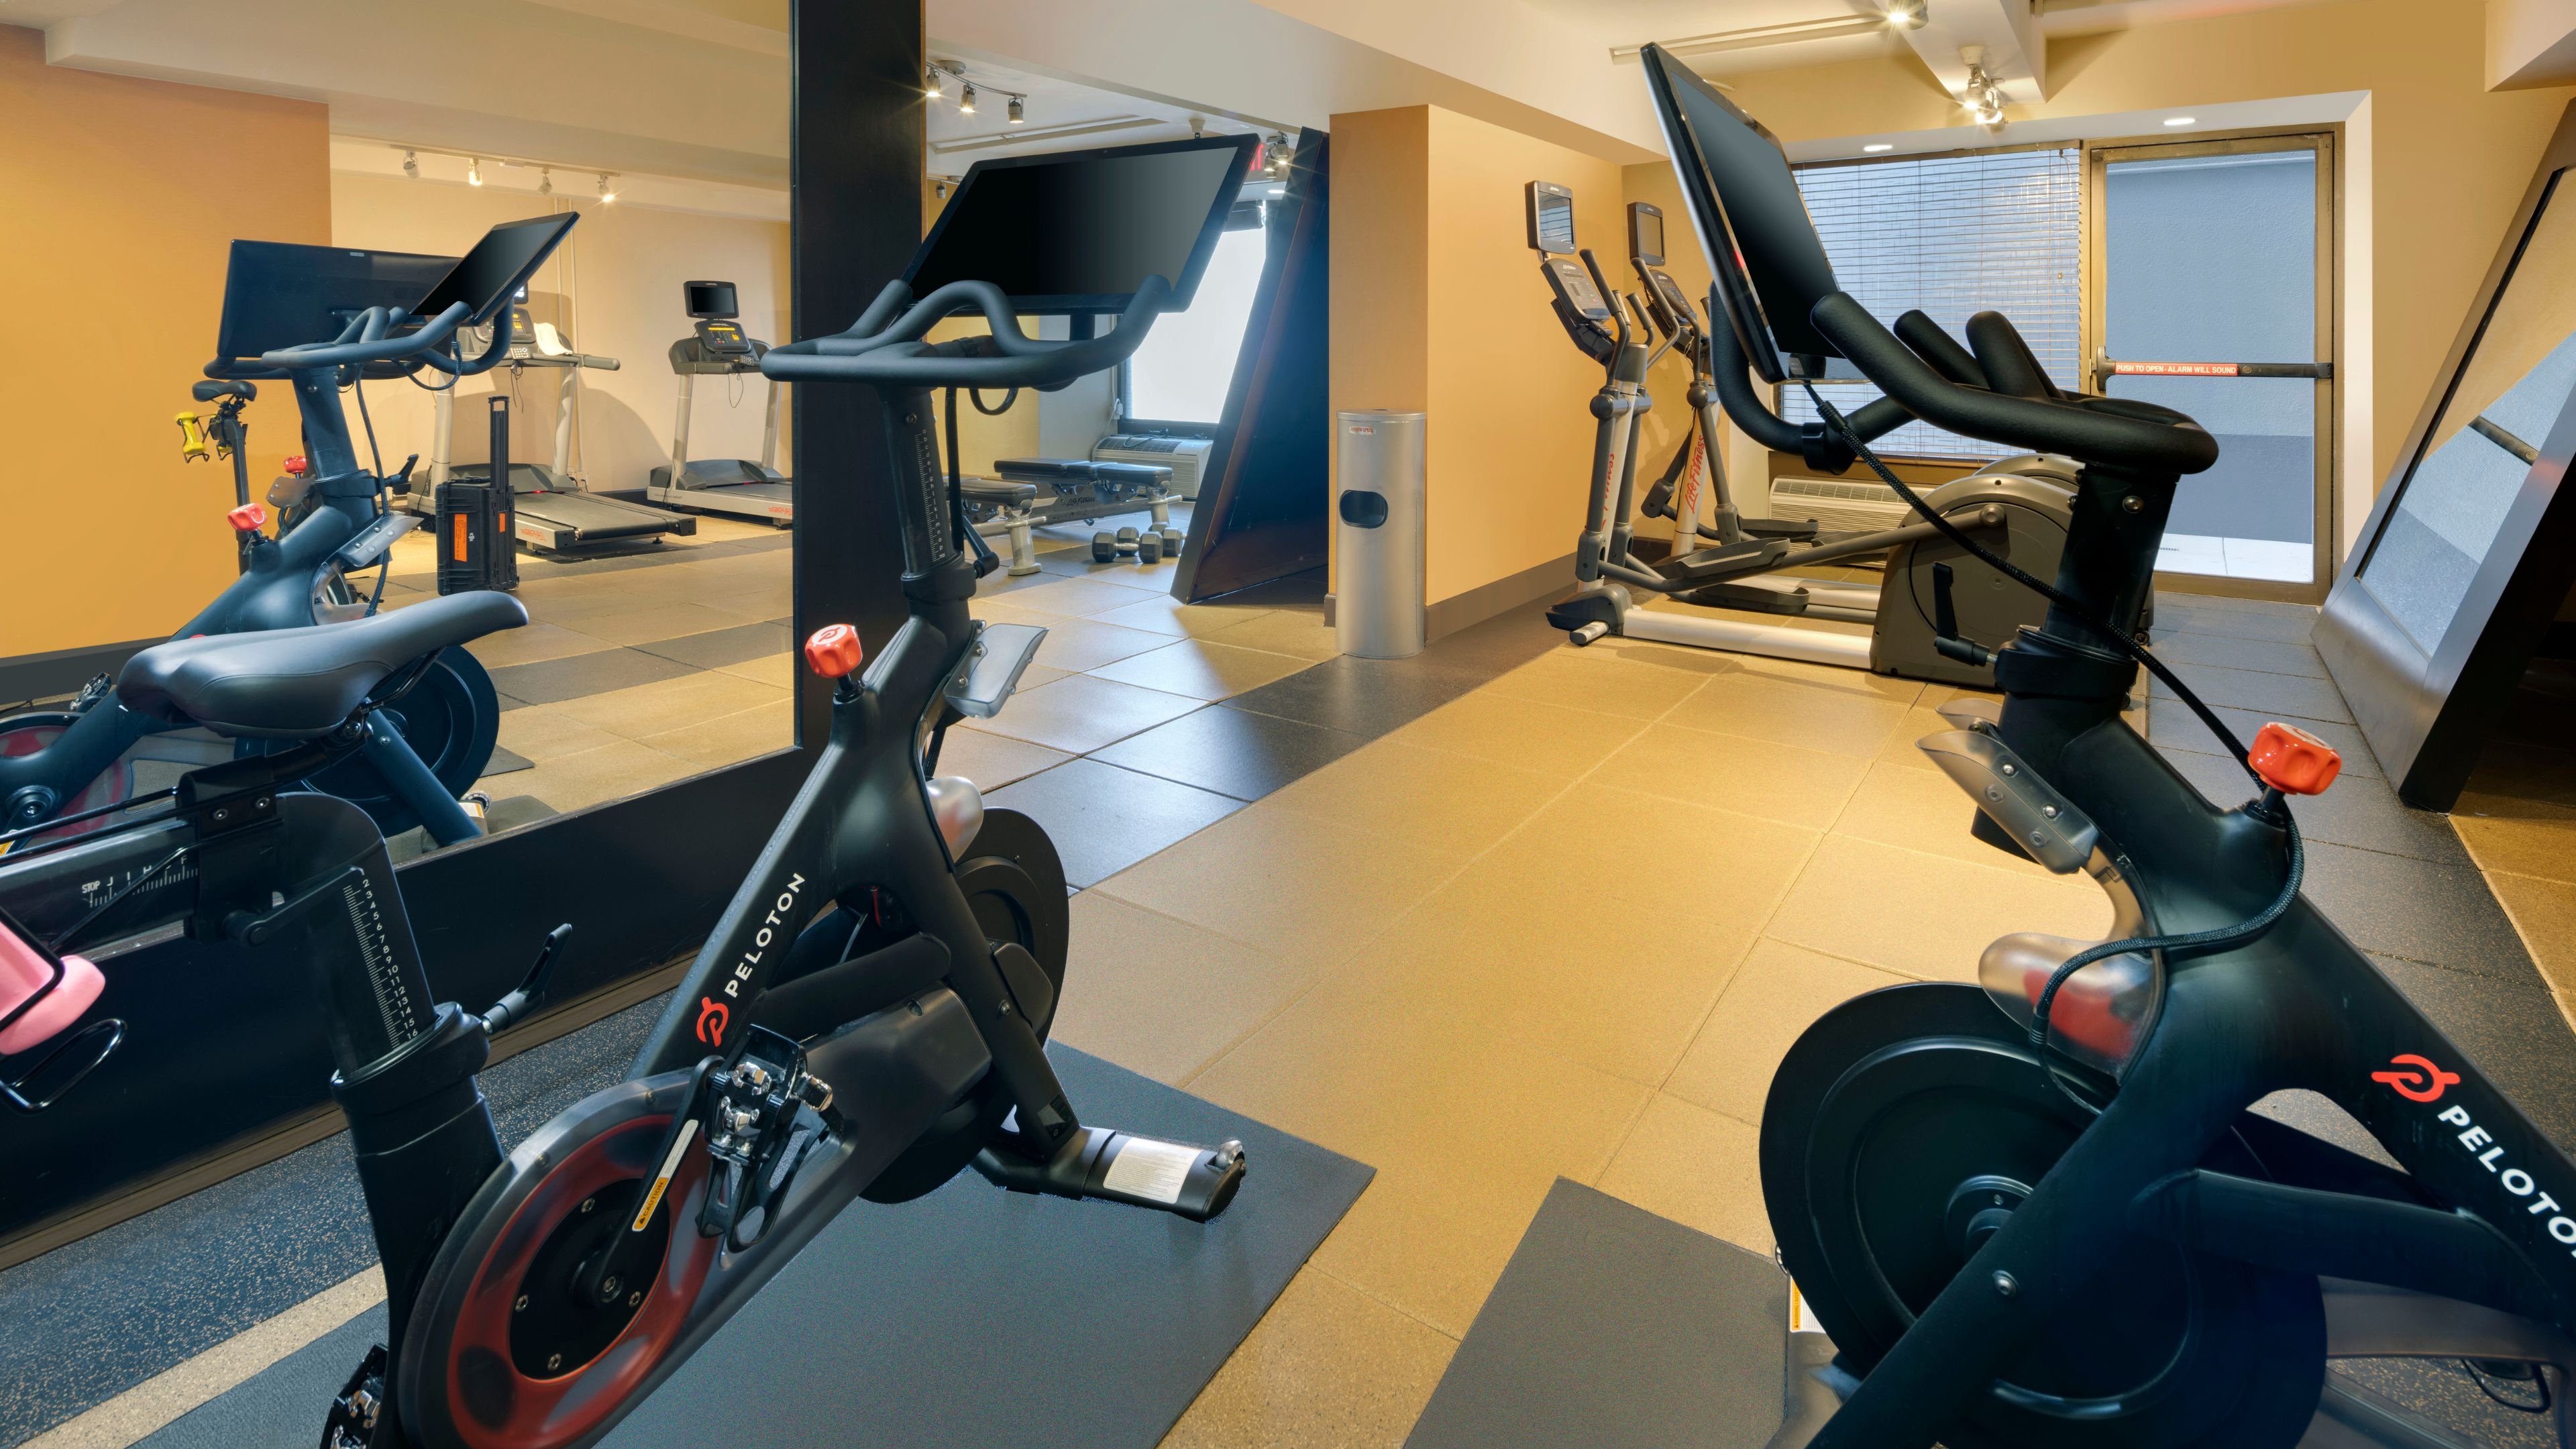 Our fitness center was recently renovated and has Peloton Bikes.